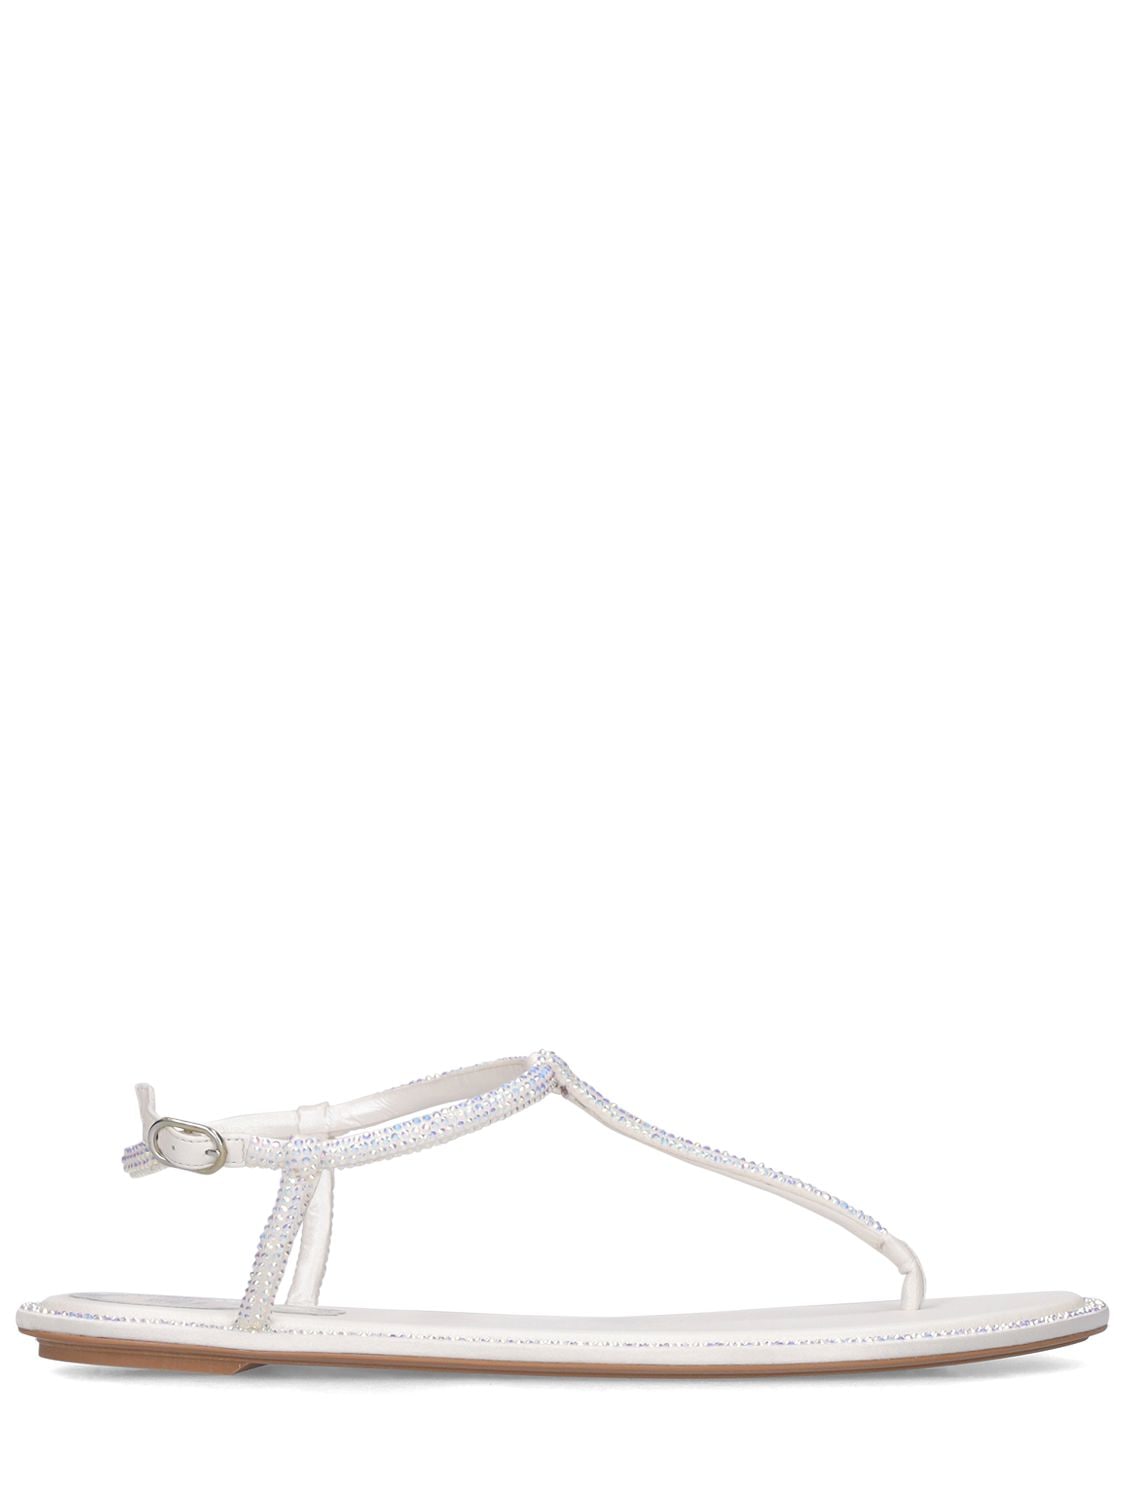 René Caovilla 10mm Embellished Satin Thong Sandals In White